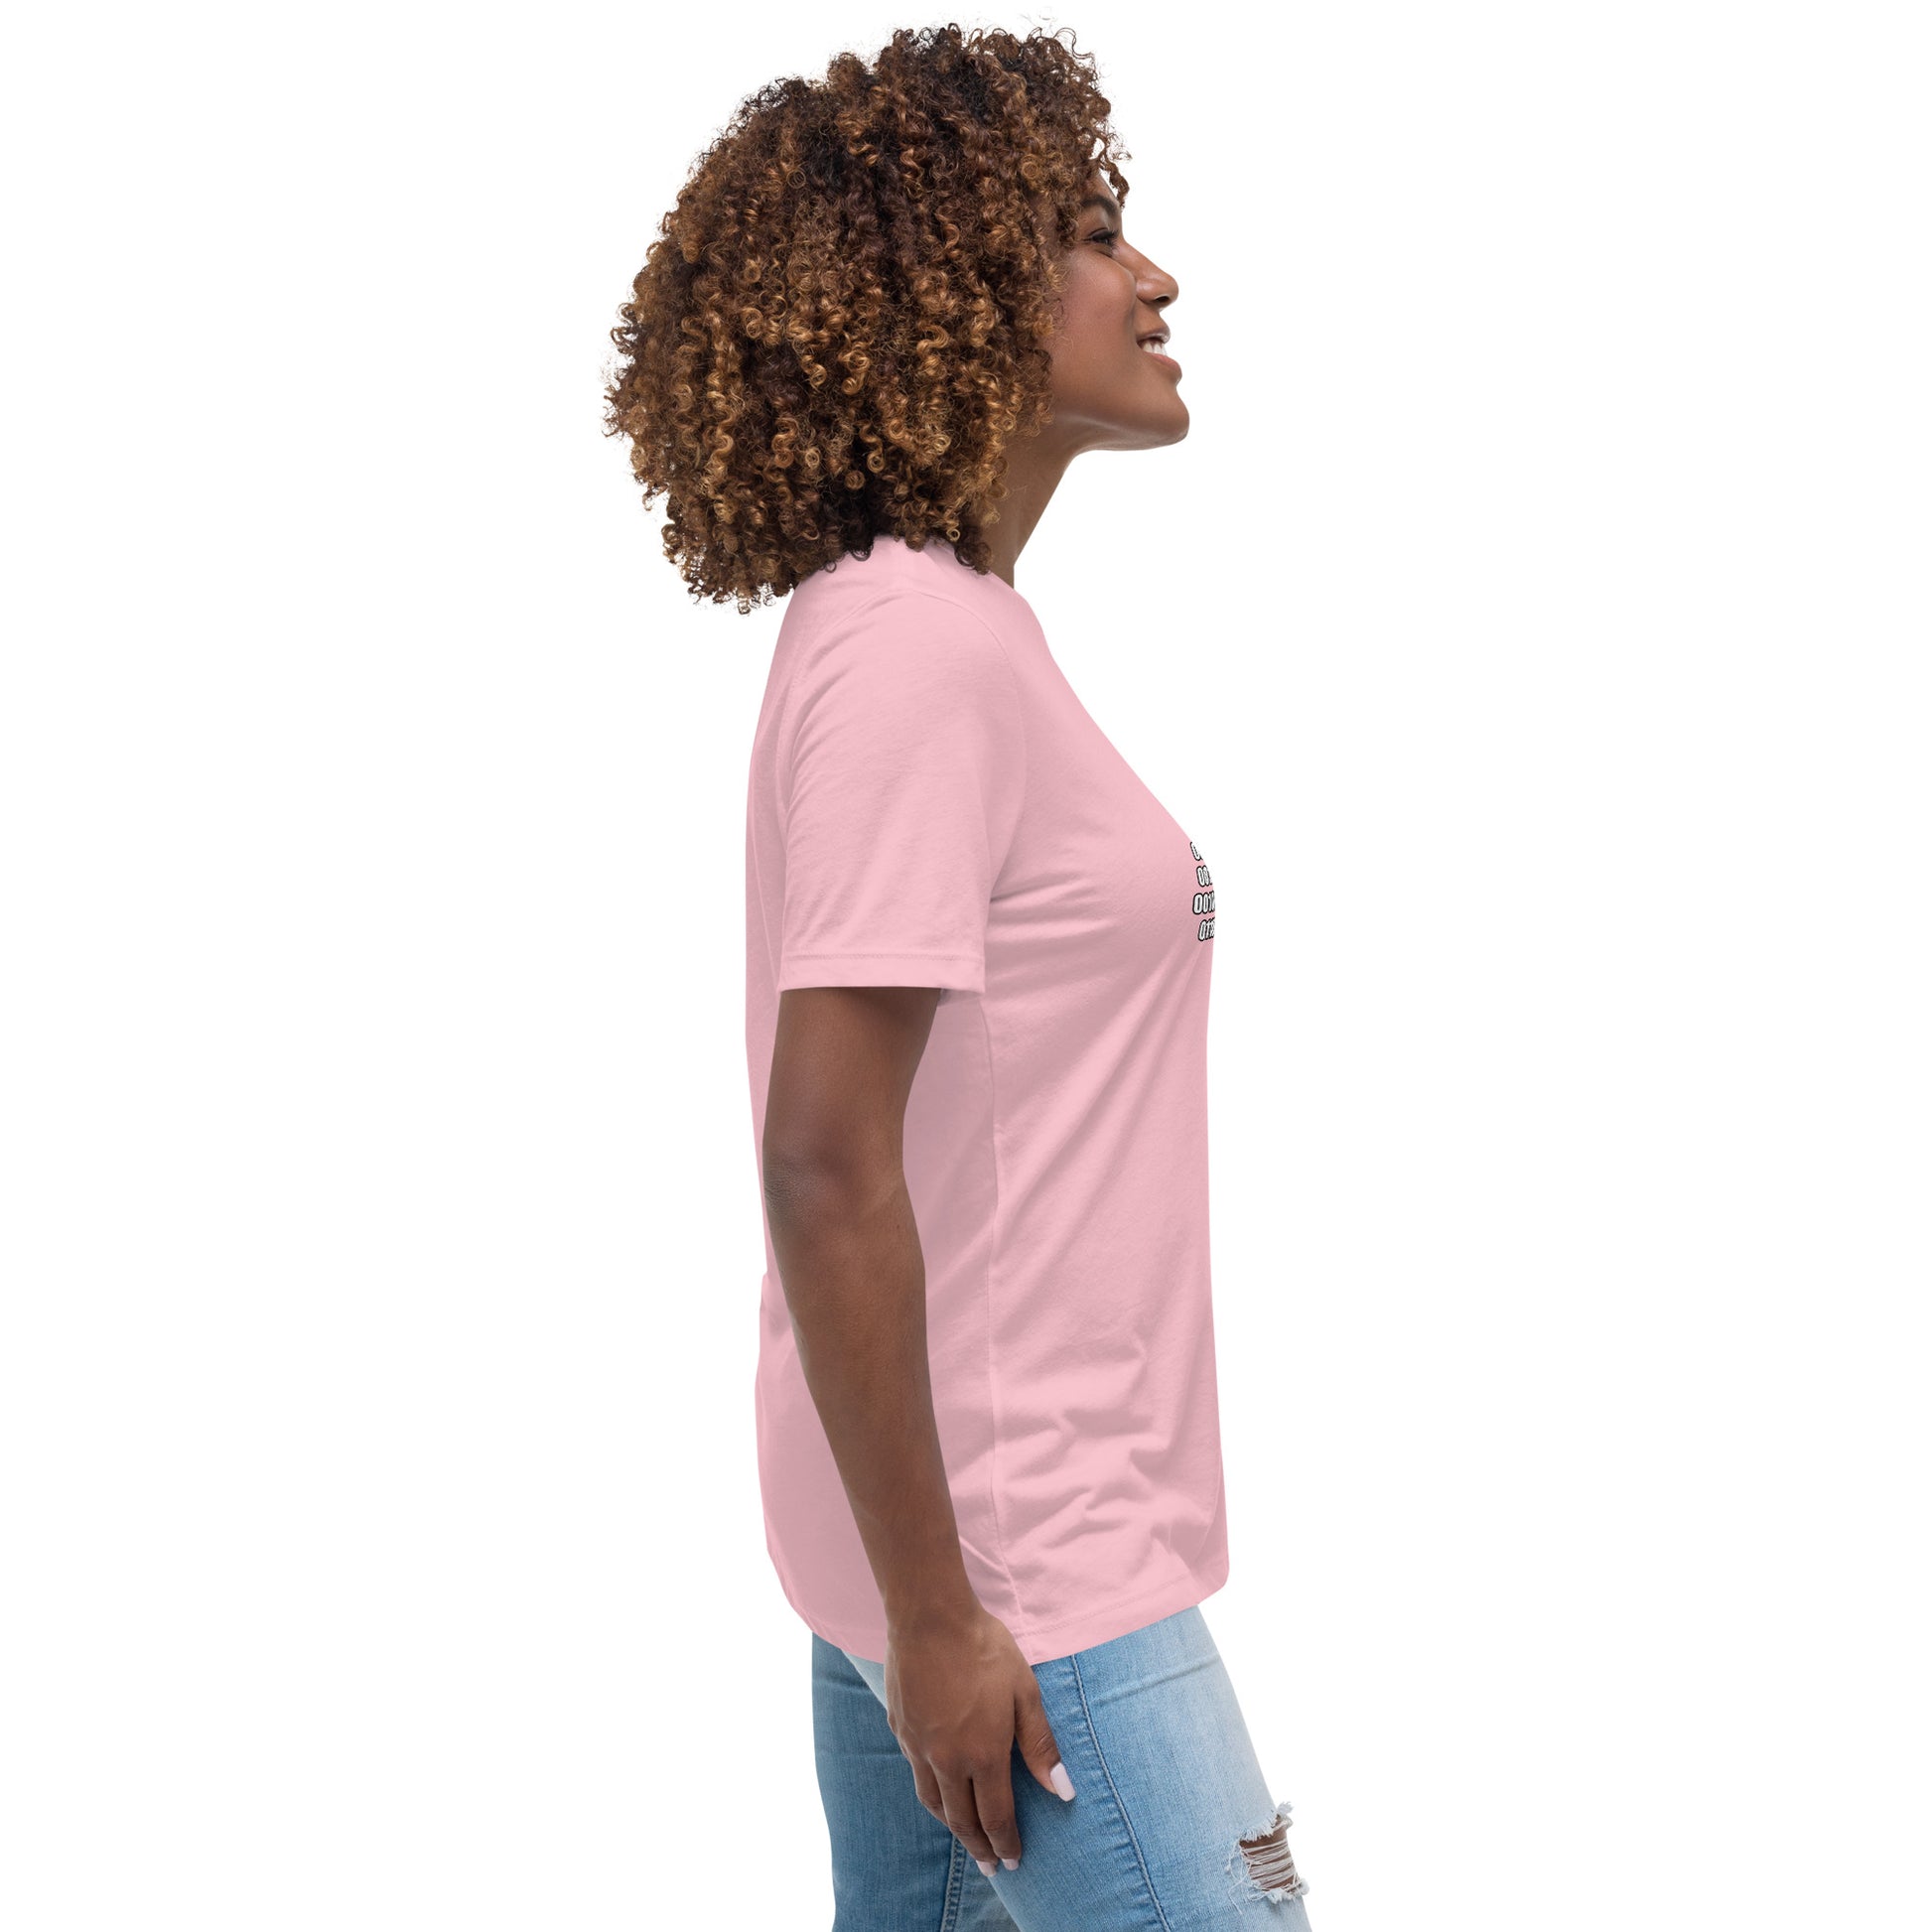 Woman with pink t-shirt with binary code "If you can read this"